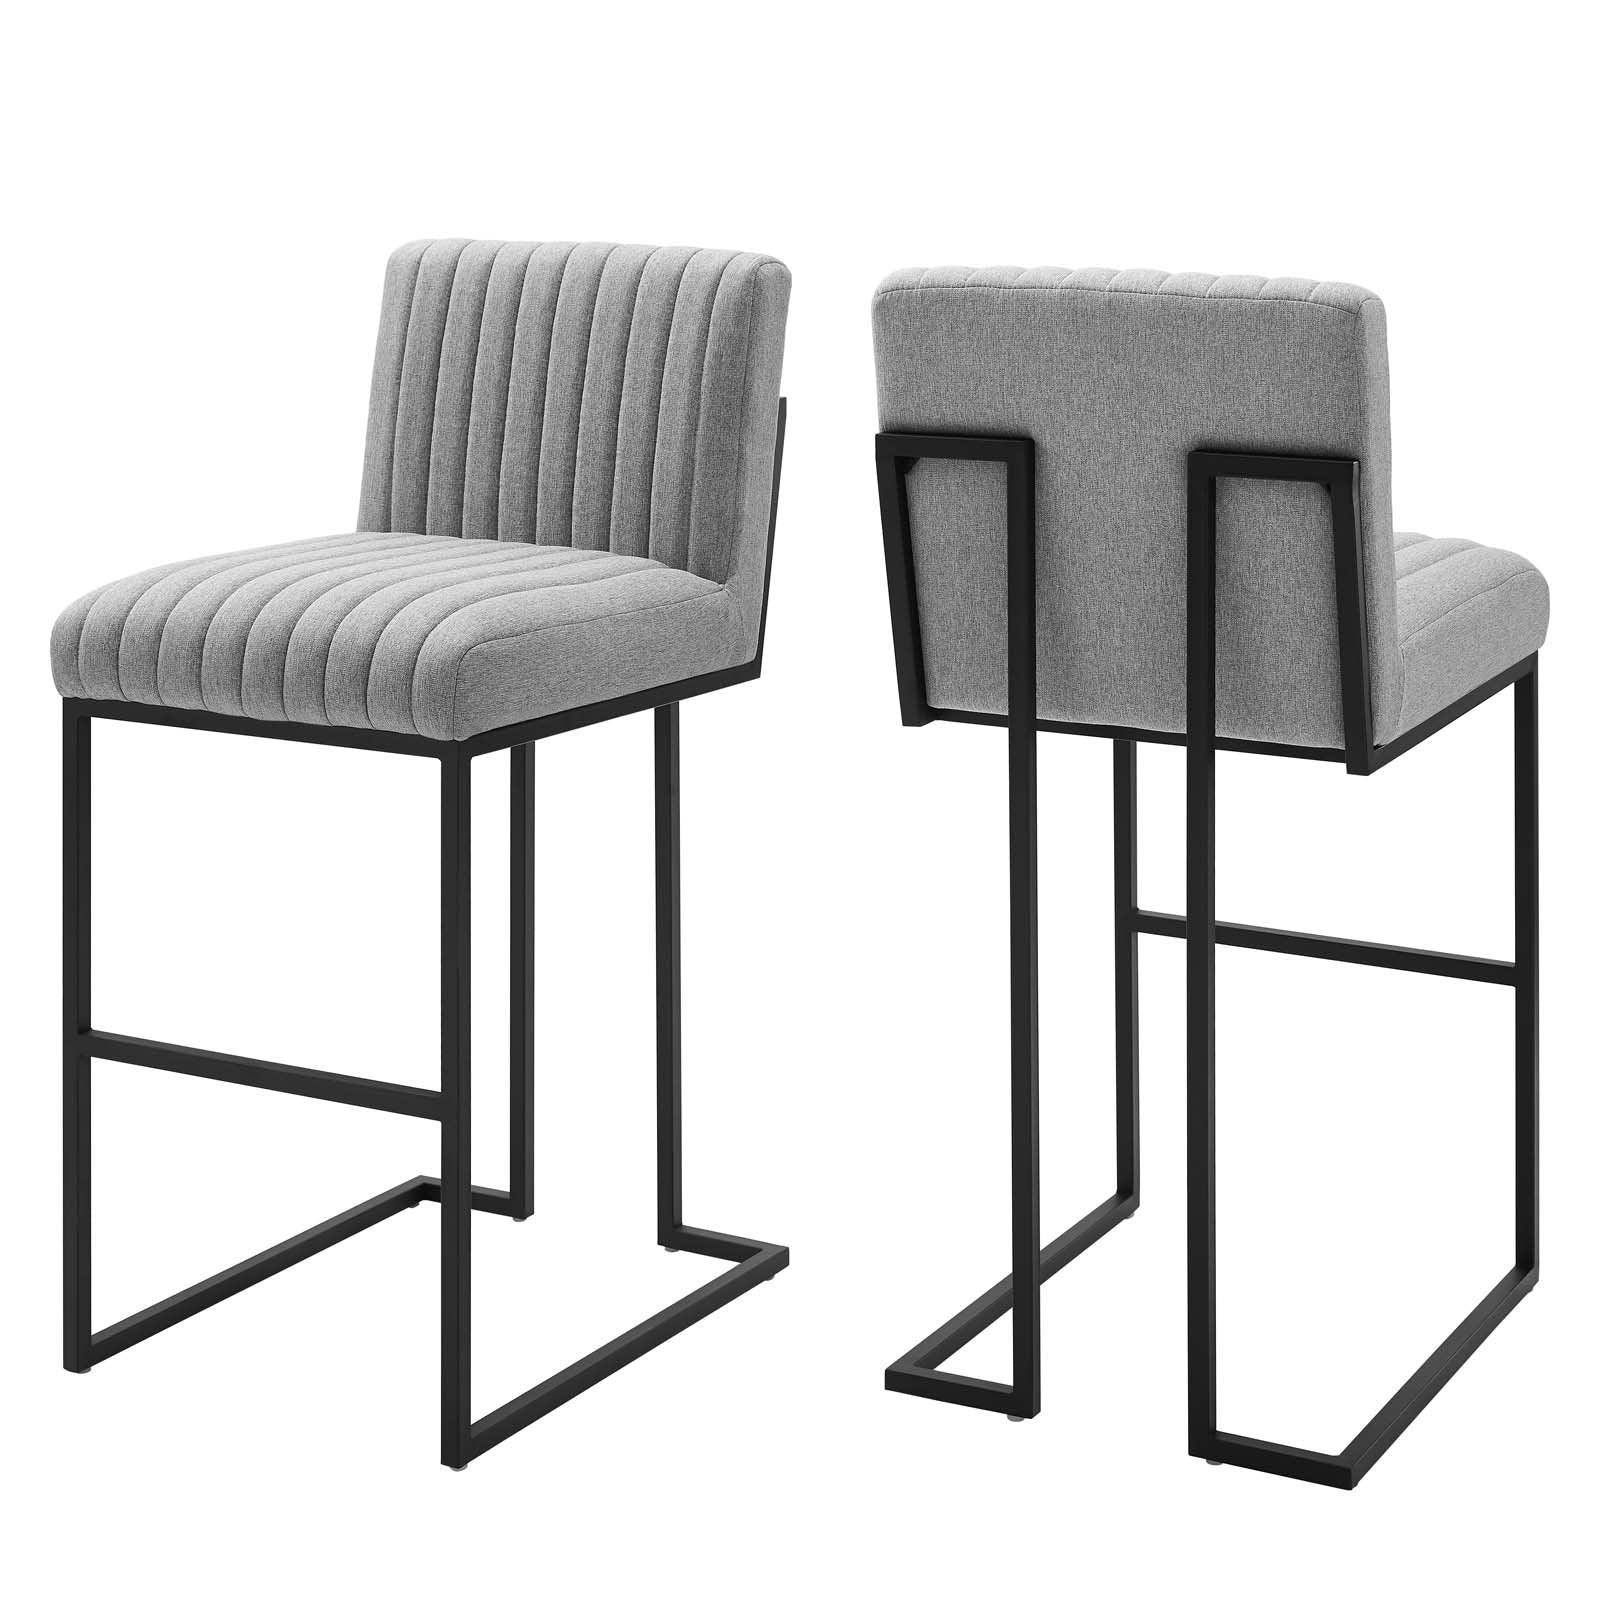 Indulge Channel Tufted Fabric Bar Stools - Set of 2 - East Shore Modern Home Furnishings